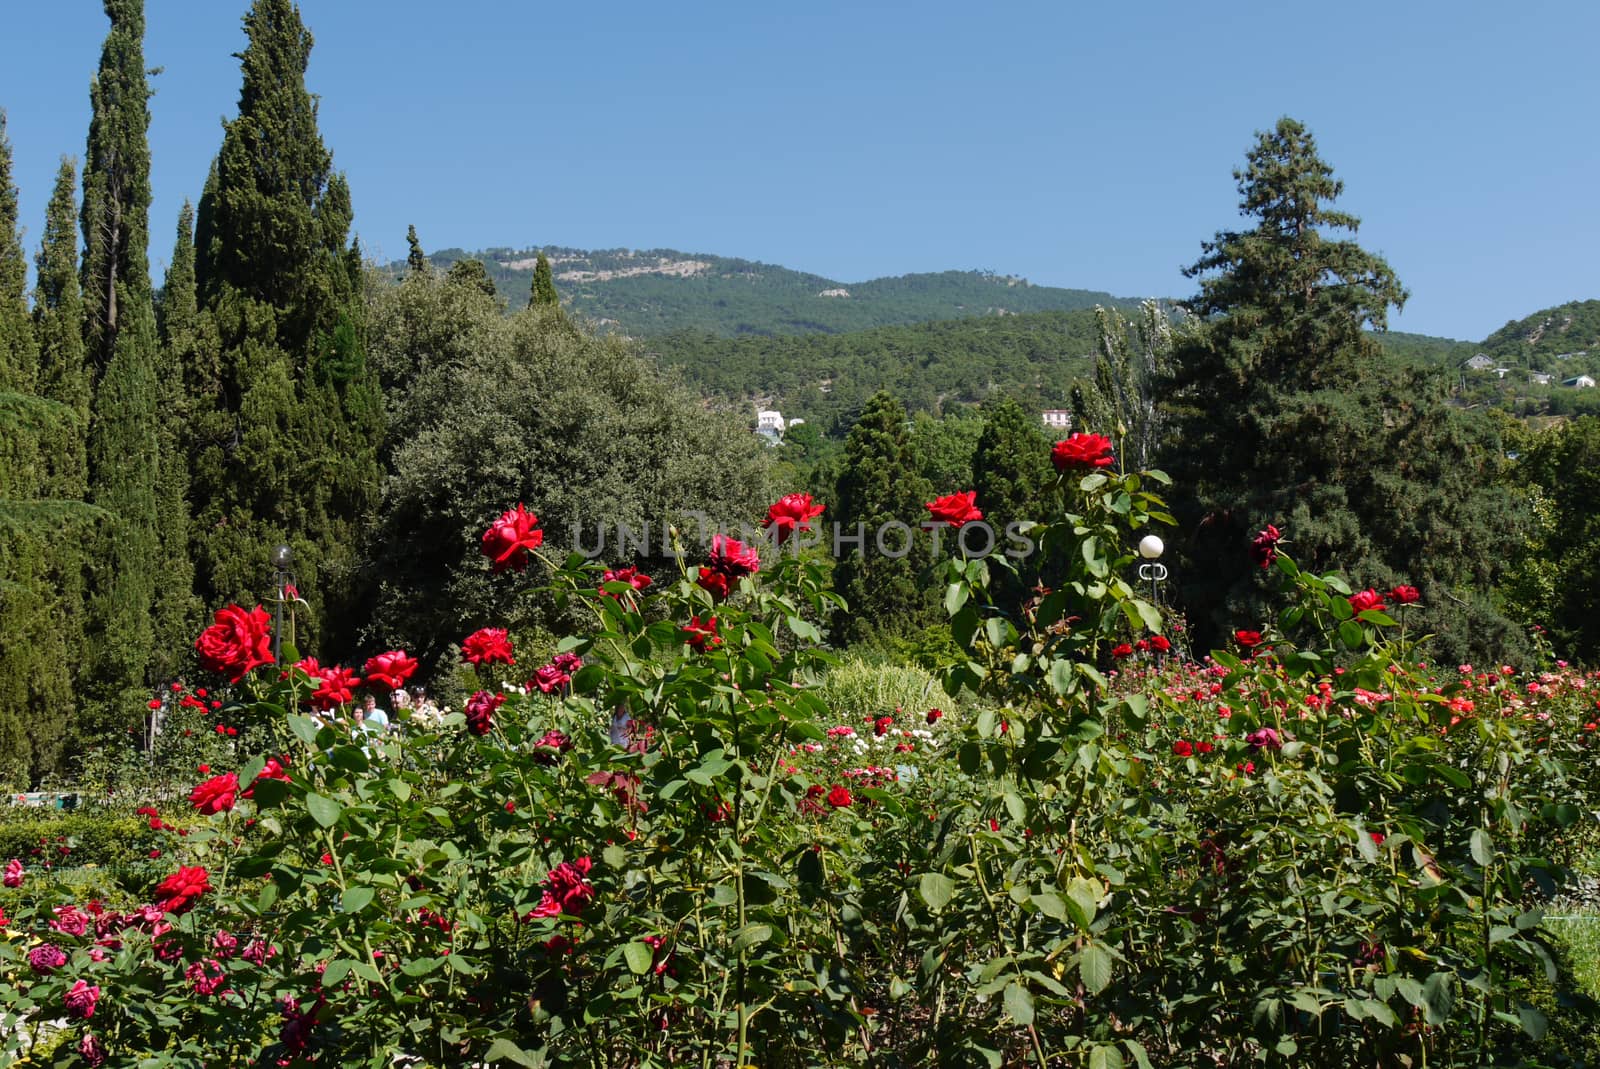 a large flower bed with flowers with a lush bush of red roses in the foreground against the background of mountain peaks visible in the distance by Adamchuk